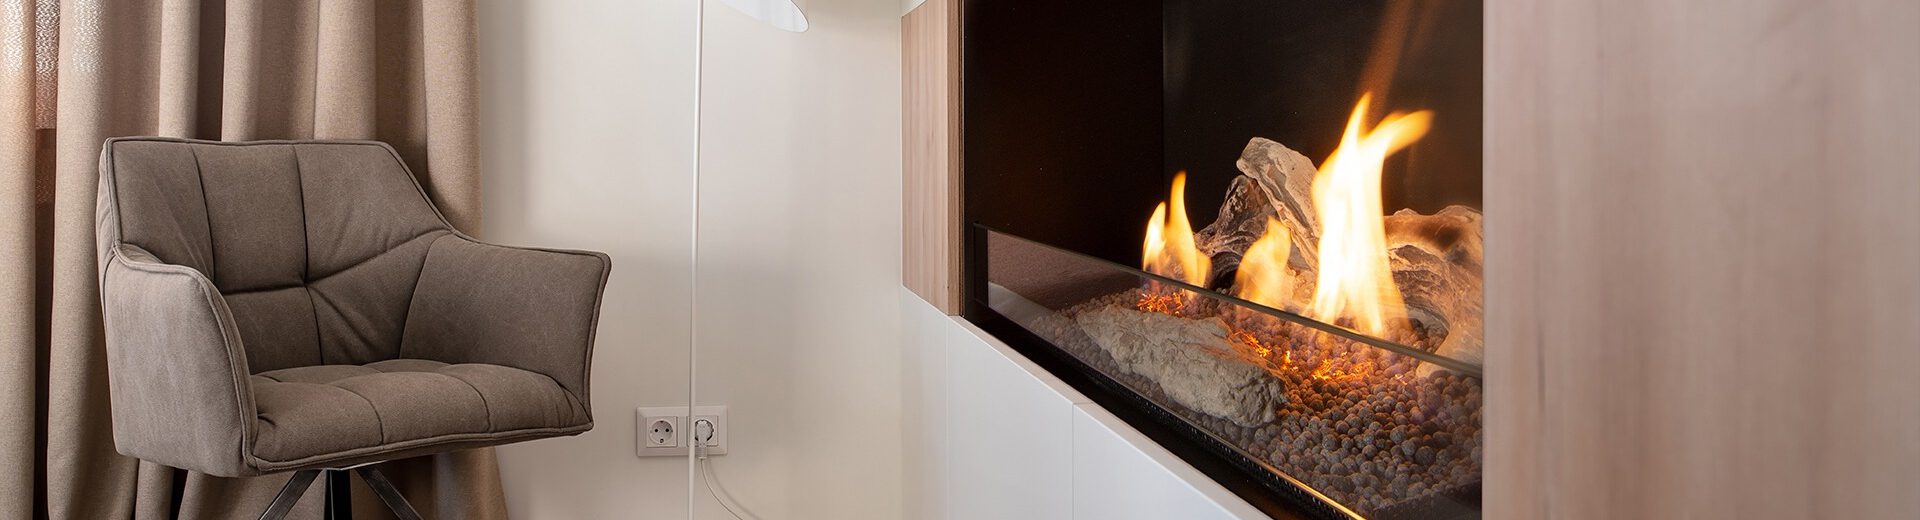 Pure Flame Built In Fireplace, Nu Flame Fiamme Ethanol Fireplace